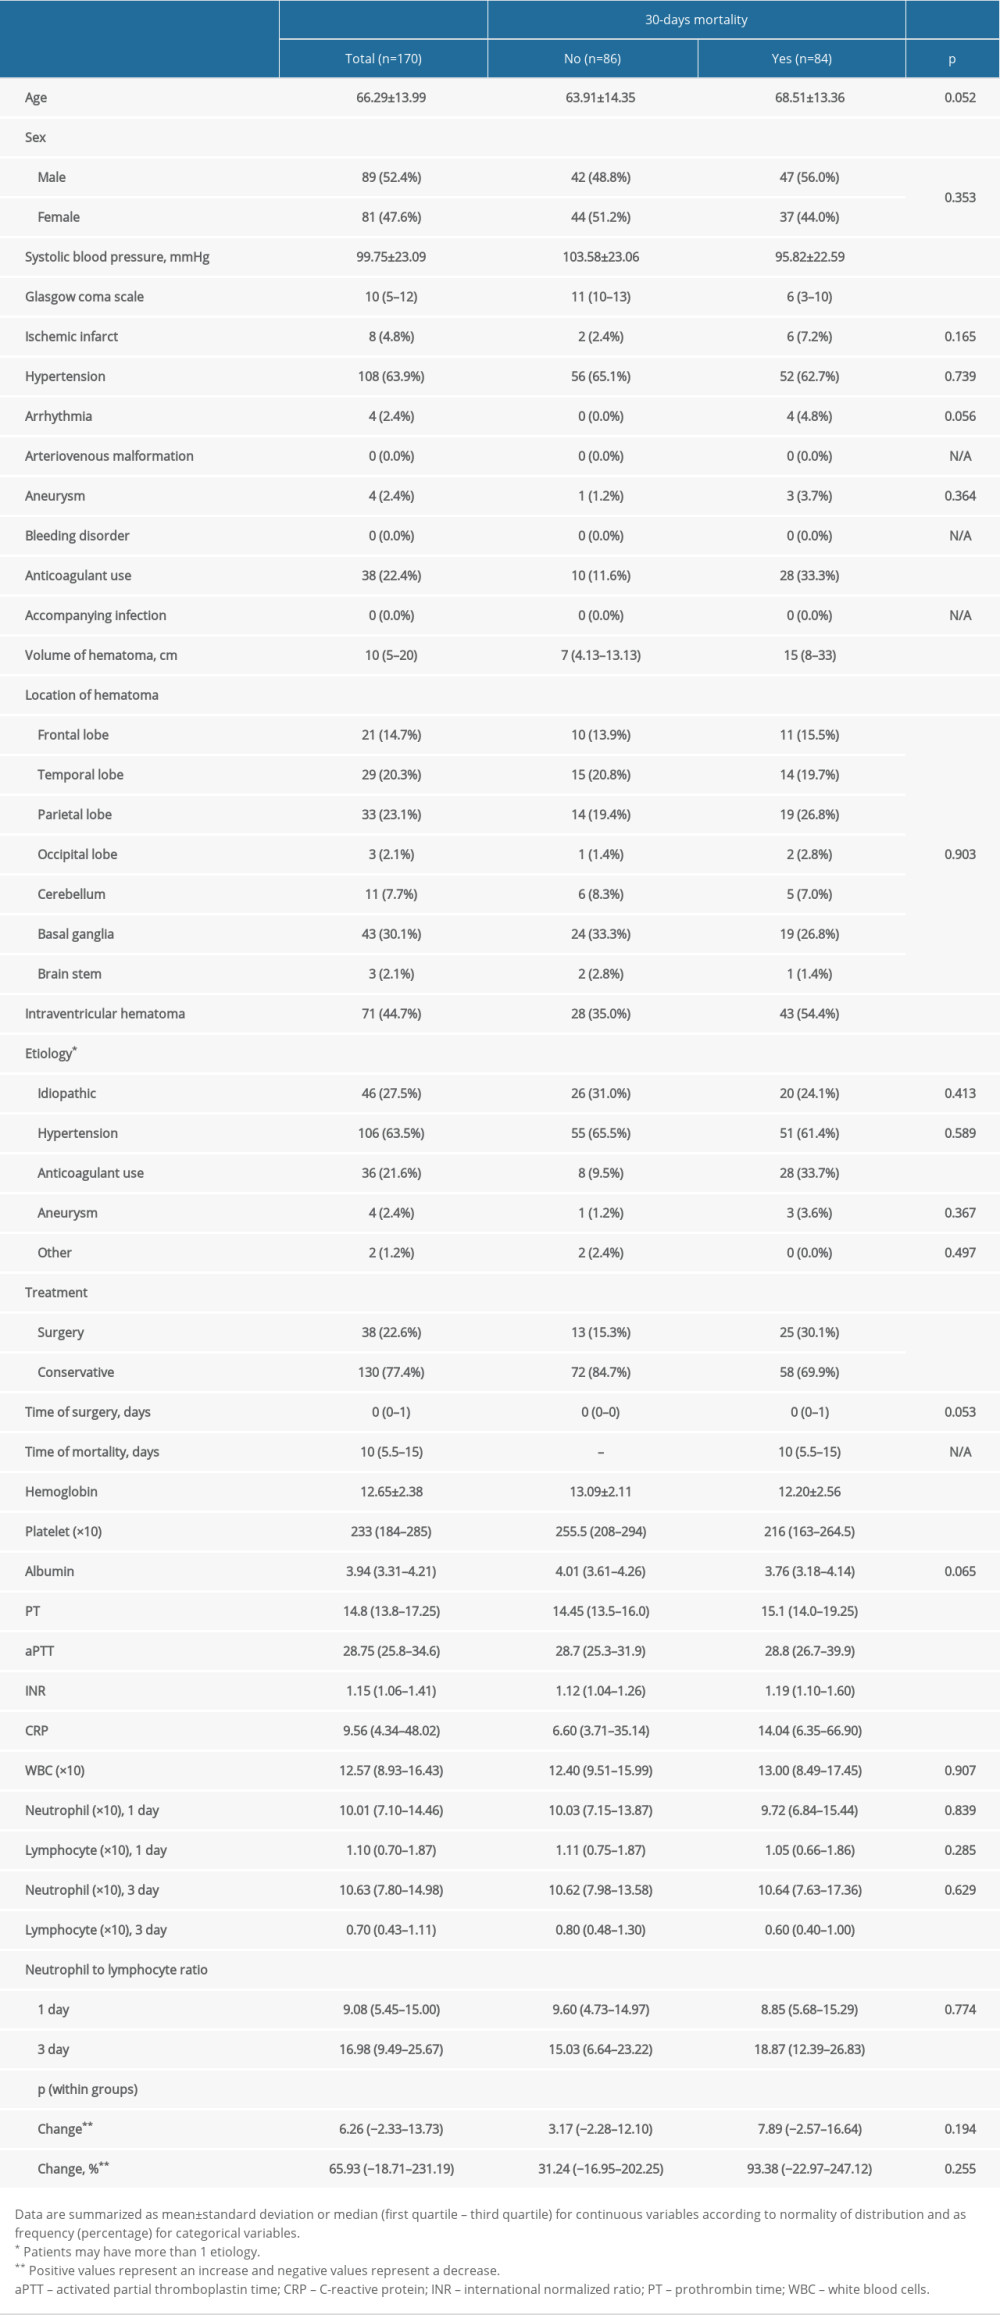 Summary of patients’ clinicodemographic characteristics and laboratory measurements with regard to 30-day mortality in patients with spontaneous intracerebral hematoma.